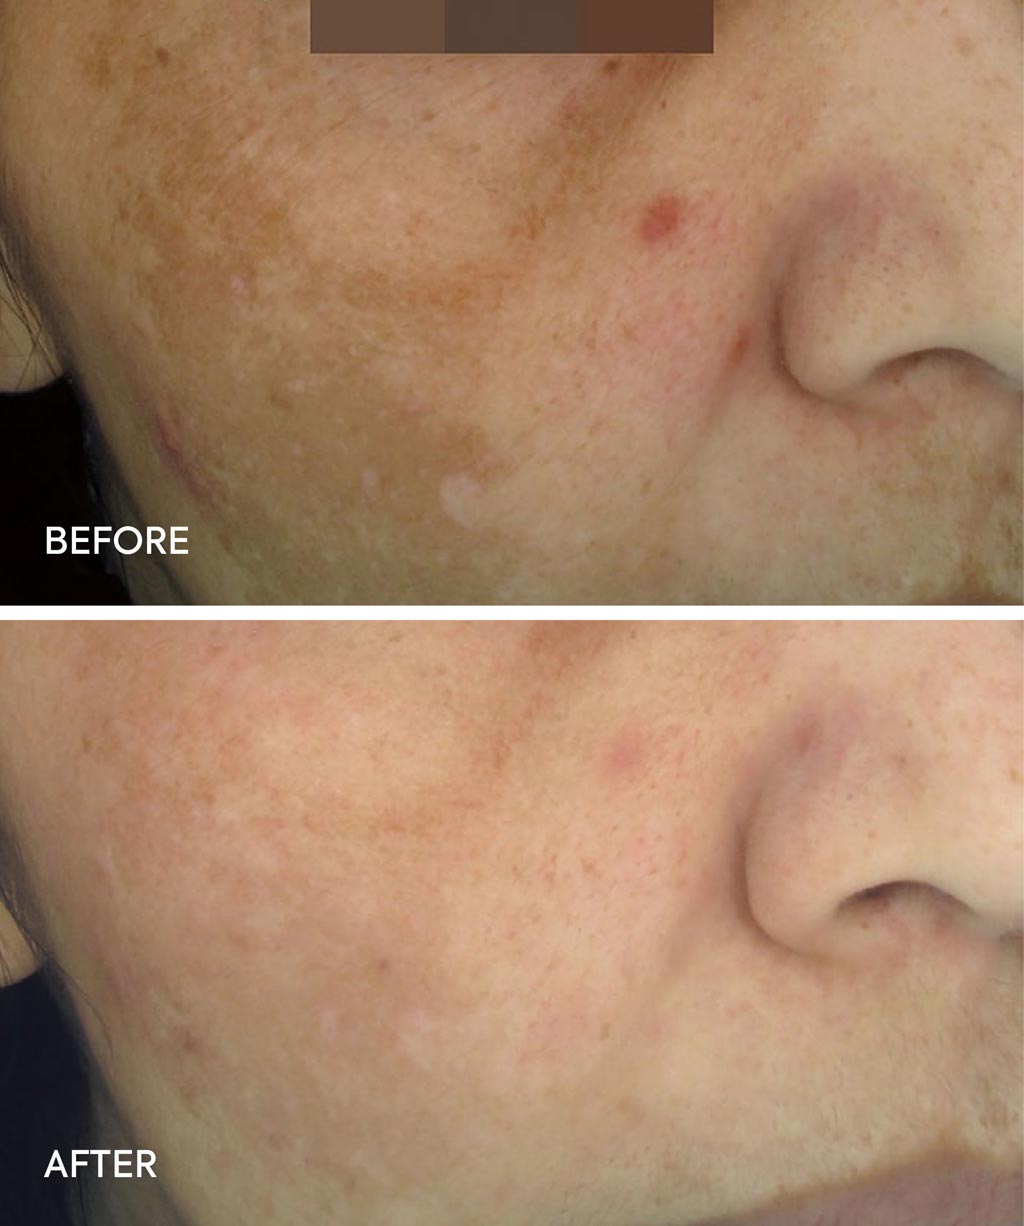 Cosmelan Treatment before and after images - 5